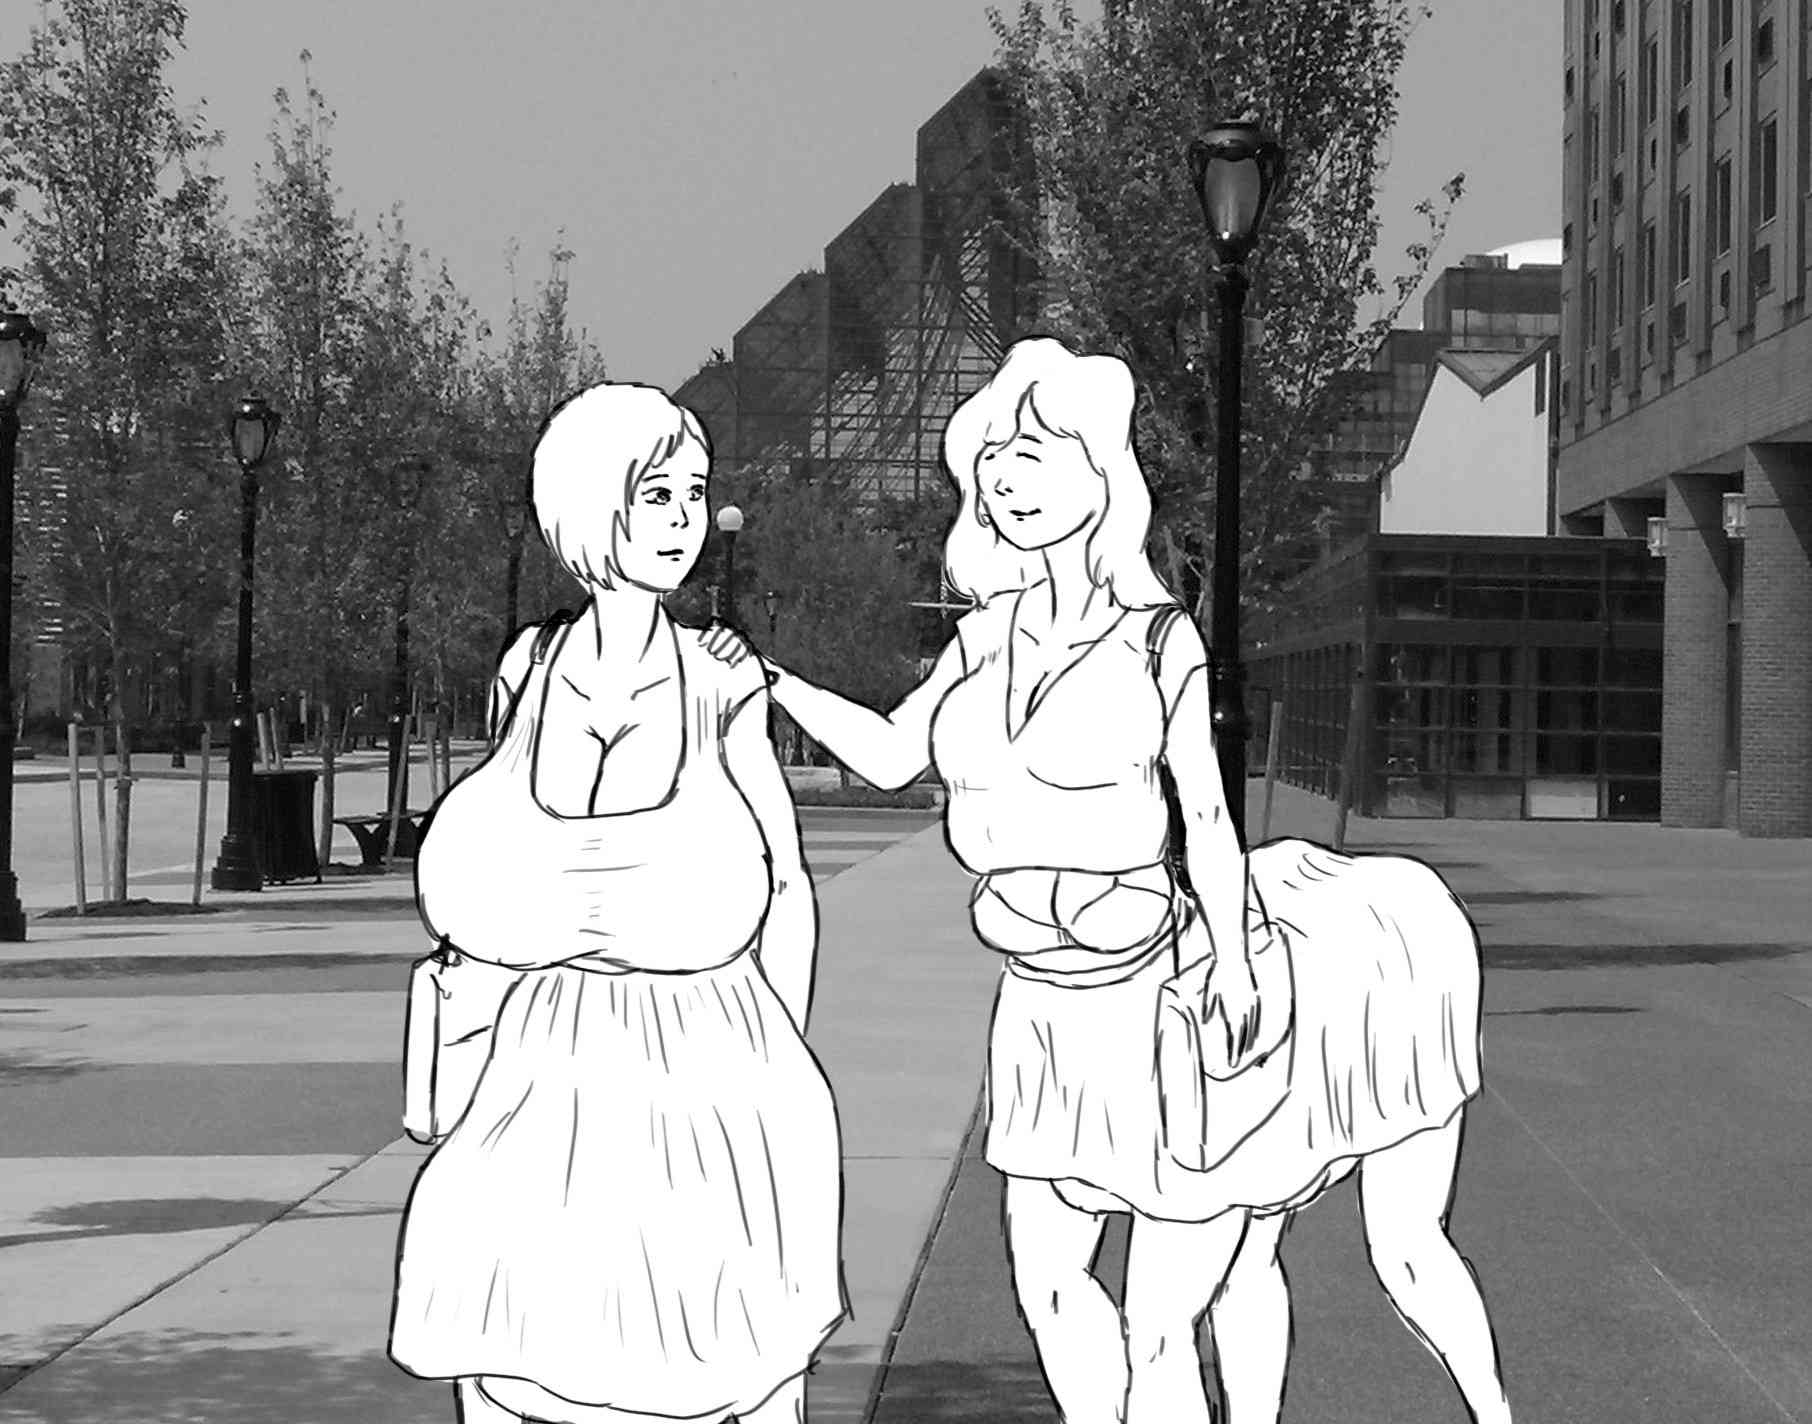 Yasmin has her right hand on Larissa’s left shoulder as they walk along the streets of their town towards the gym